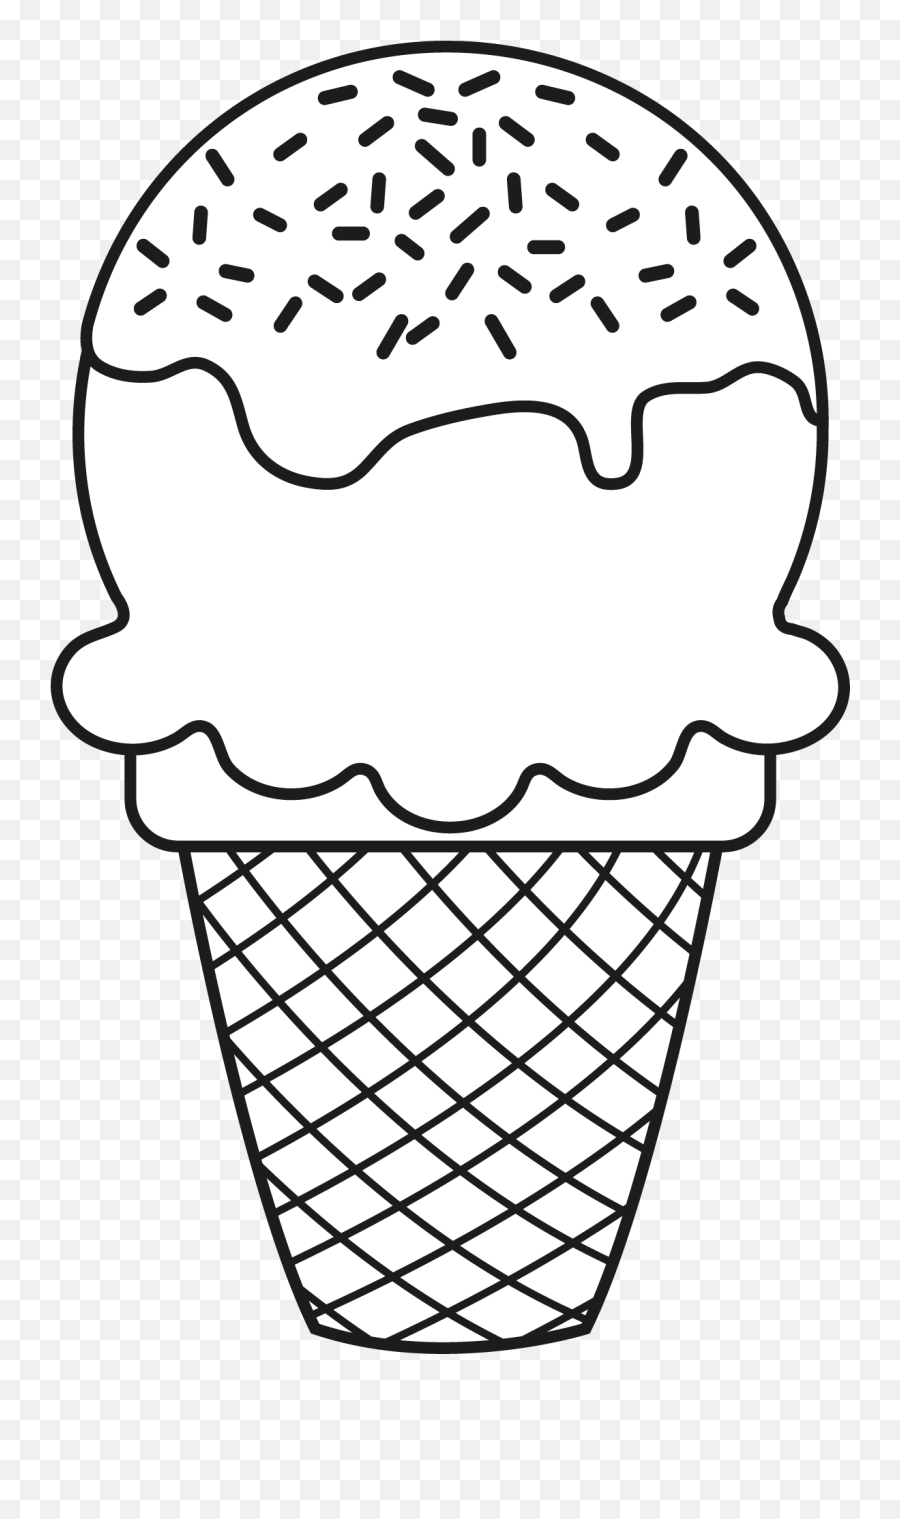 Crealo Tu Cute Coloring Pages Printable - Summer Ice Cream Coloring Pages Emoji,Free Printable Emoji Coloring Pages